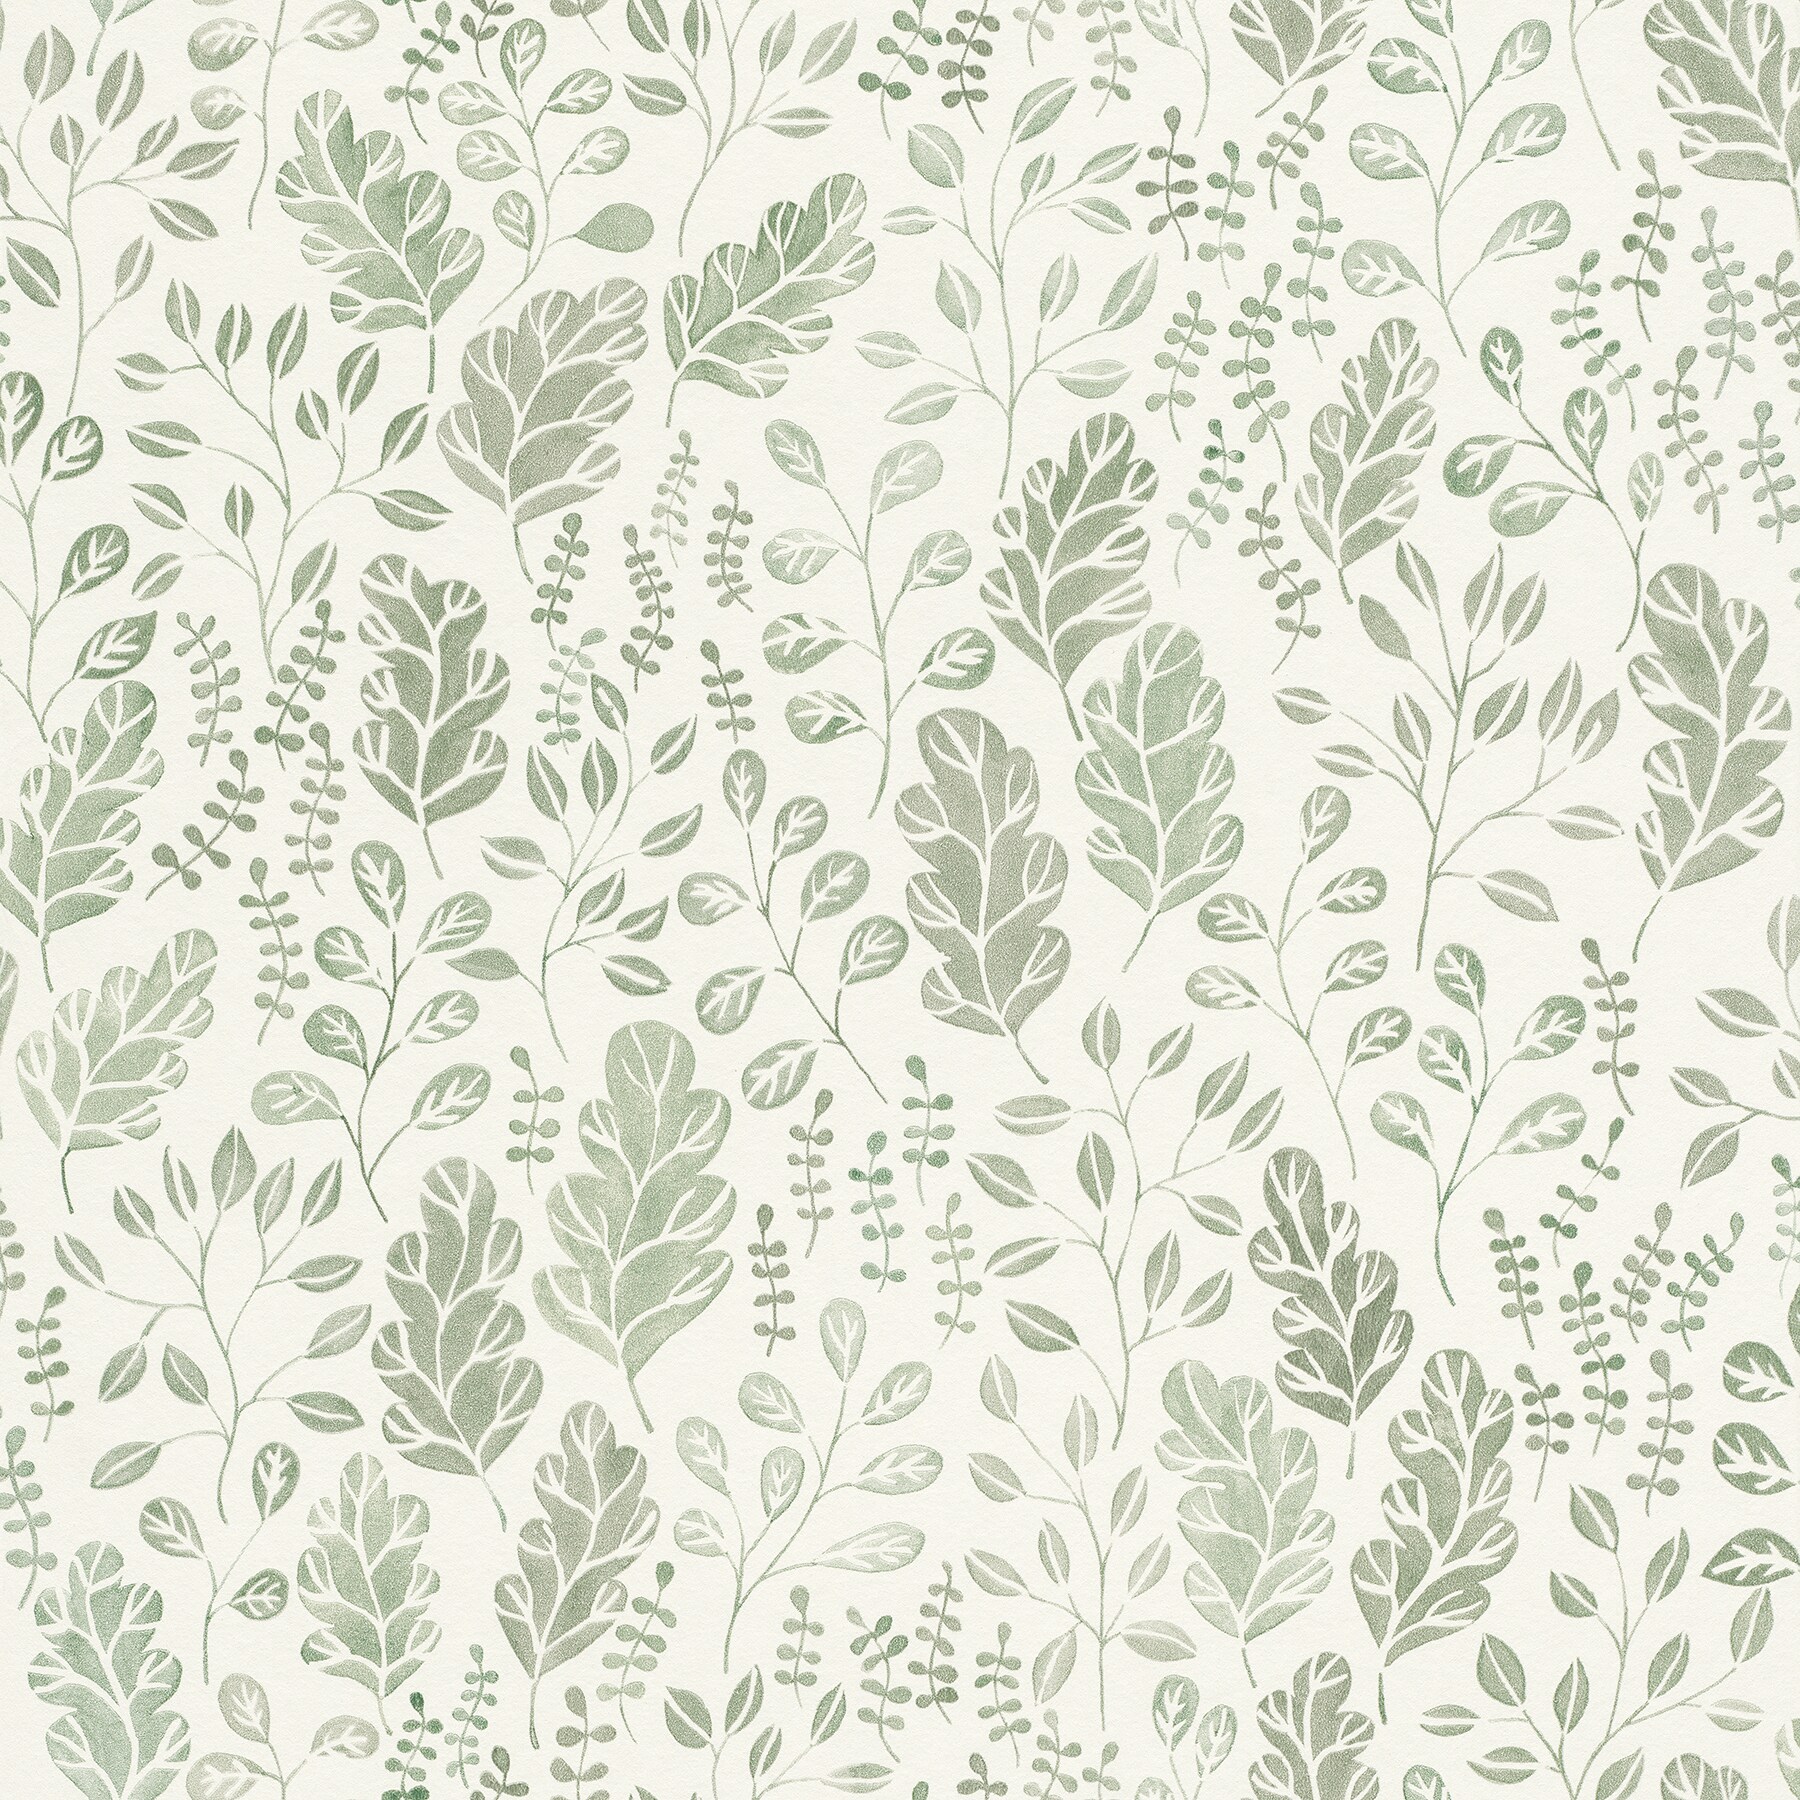 A-Street Prints Spring 56.4-sq ft Green Non-woven Ivy/Vines Unpasted ...